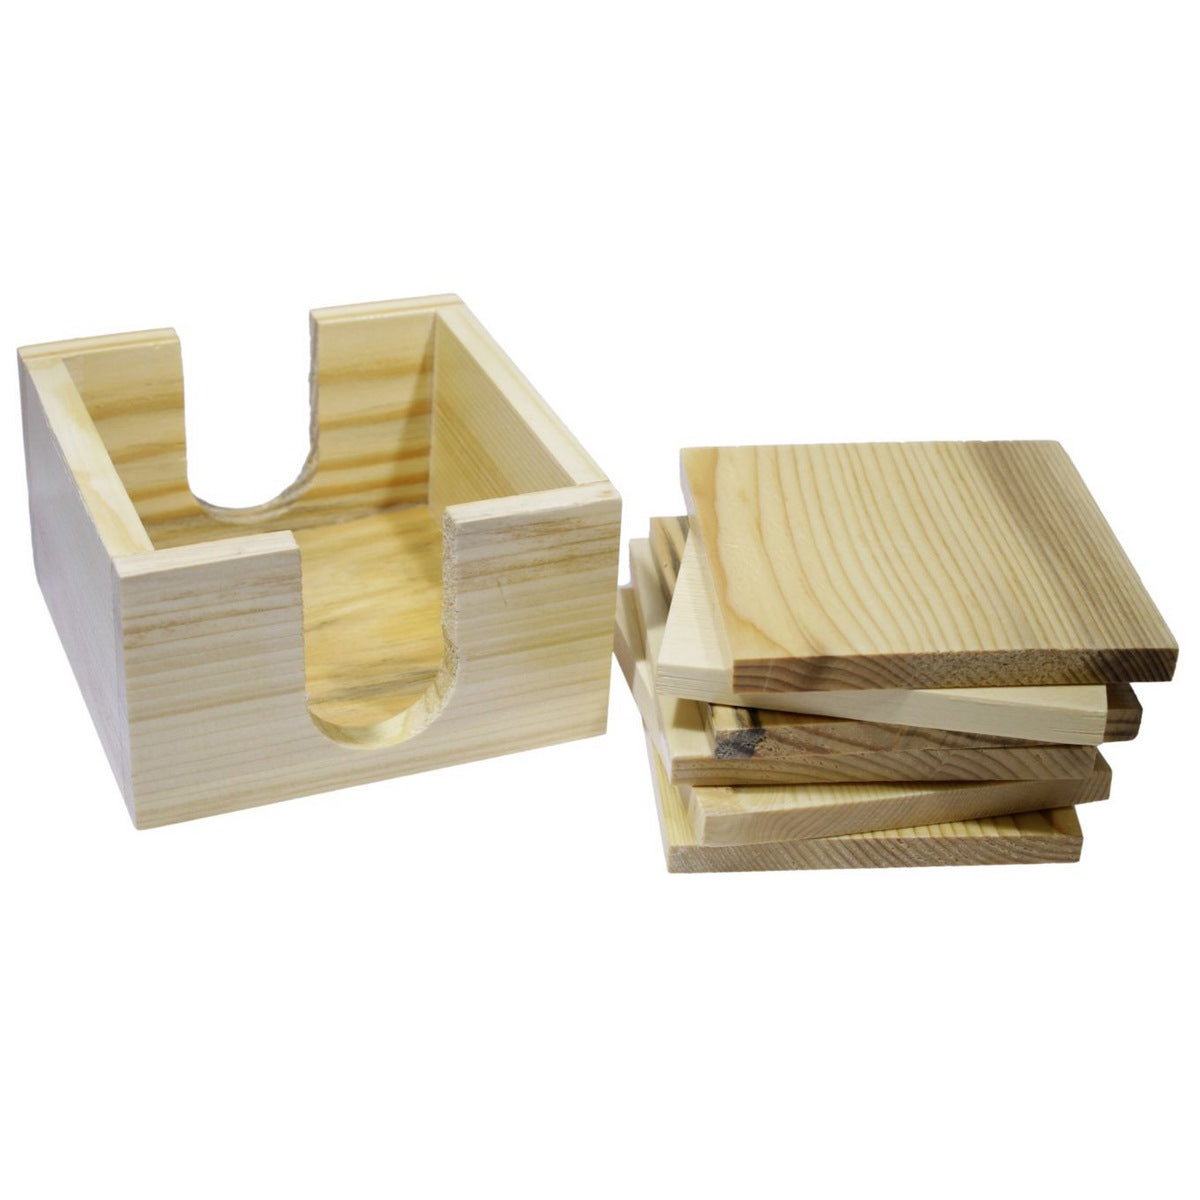 Set of 6 Square Wooden Tea Coaster - For Corporate Gifting, Office Use, Personal Use, Return Gift